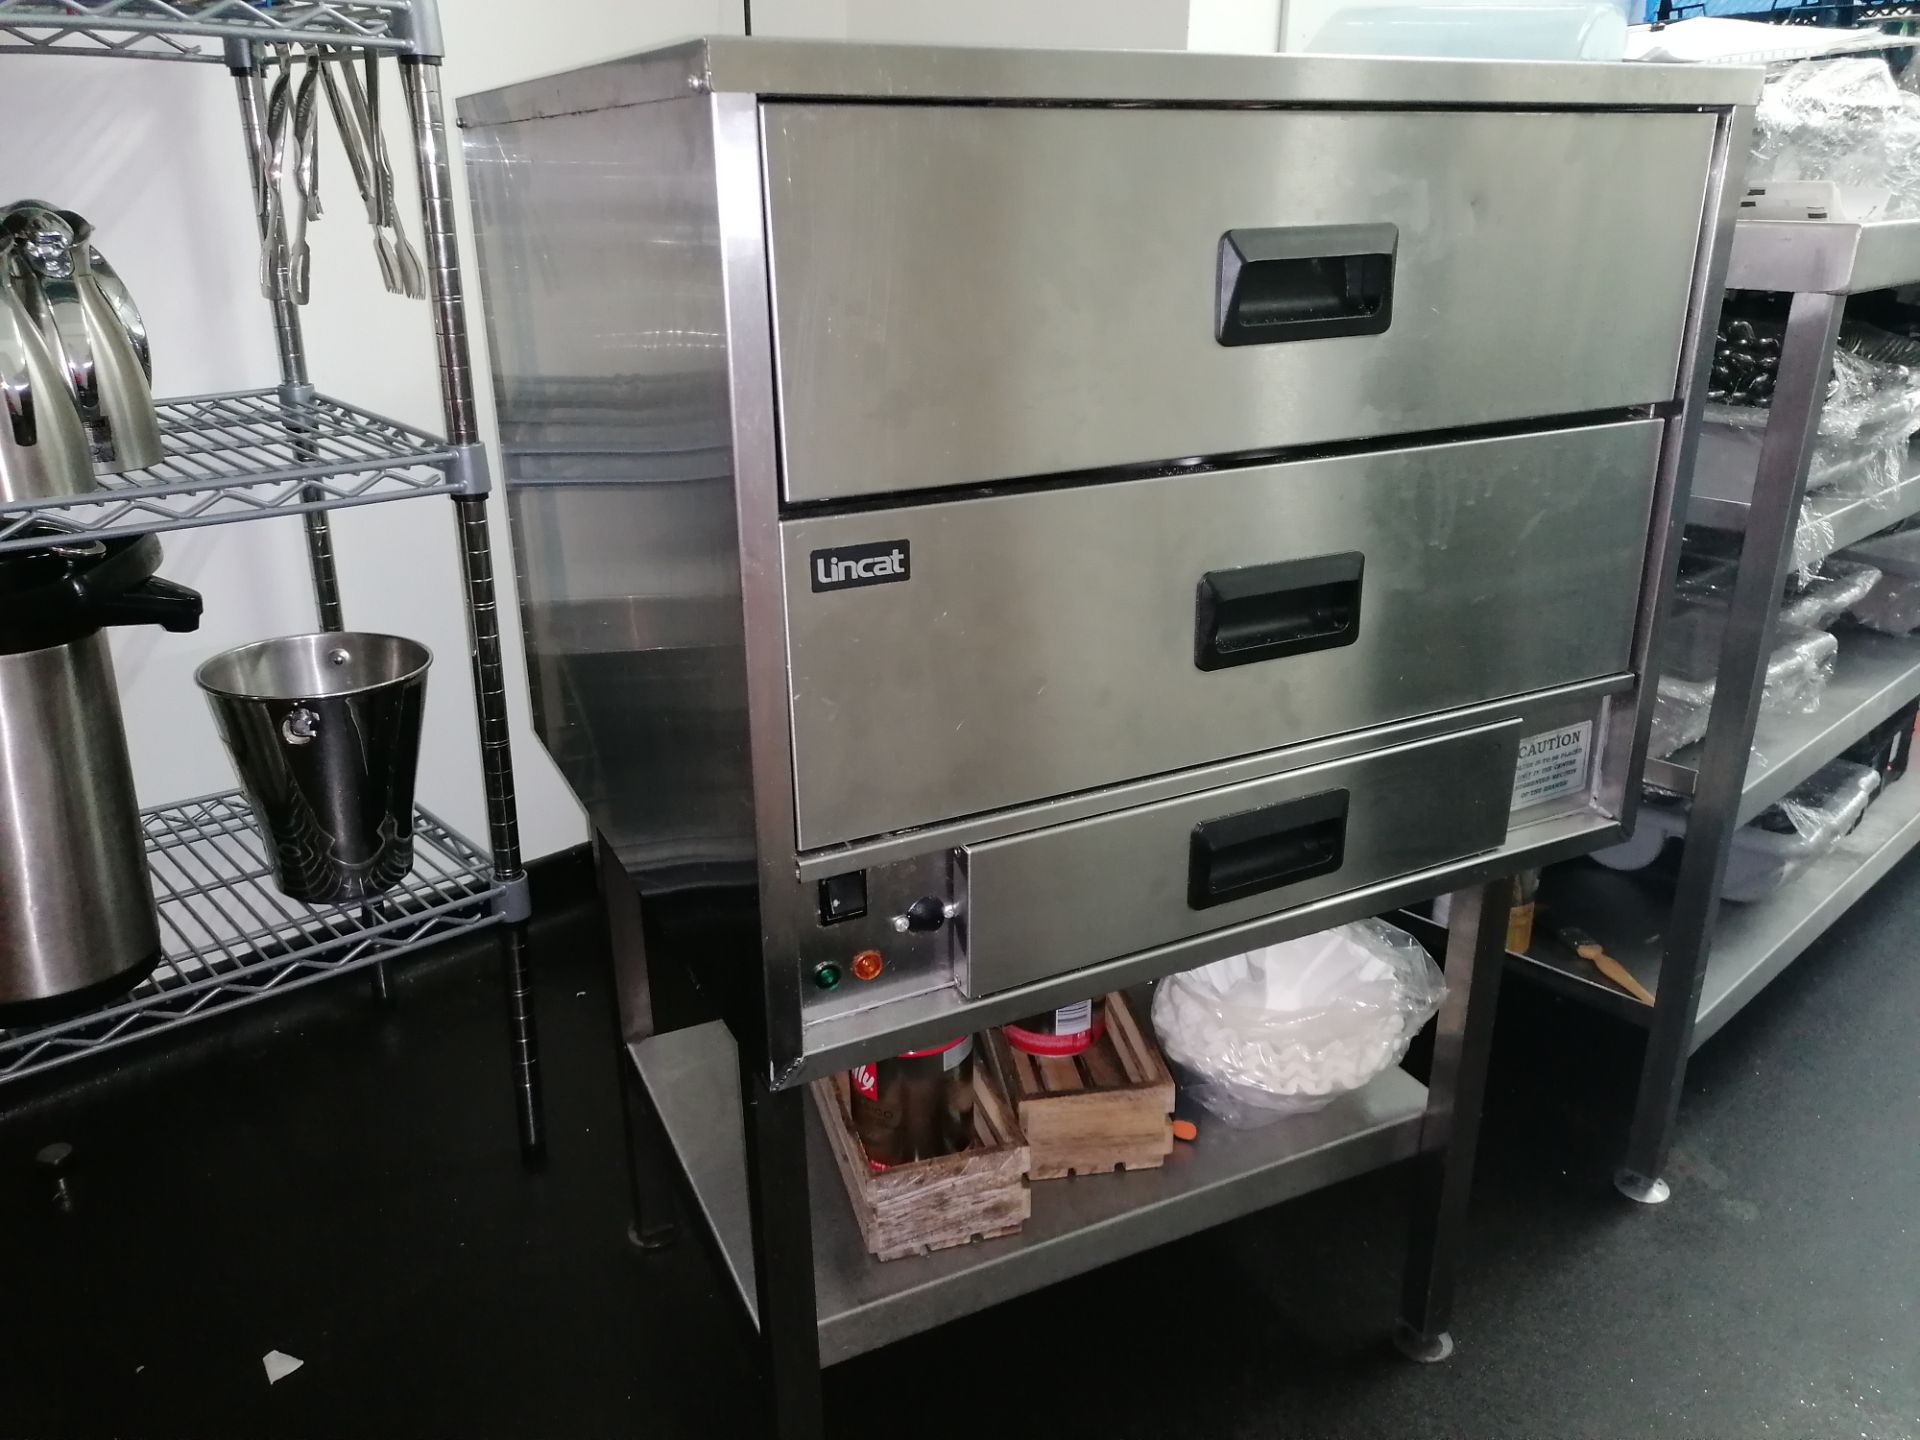 Lincat Model FWDG foodwarmer draws with stainless